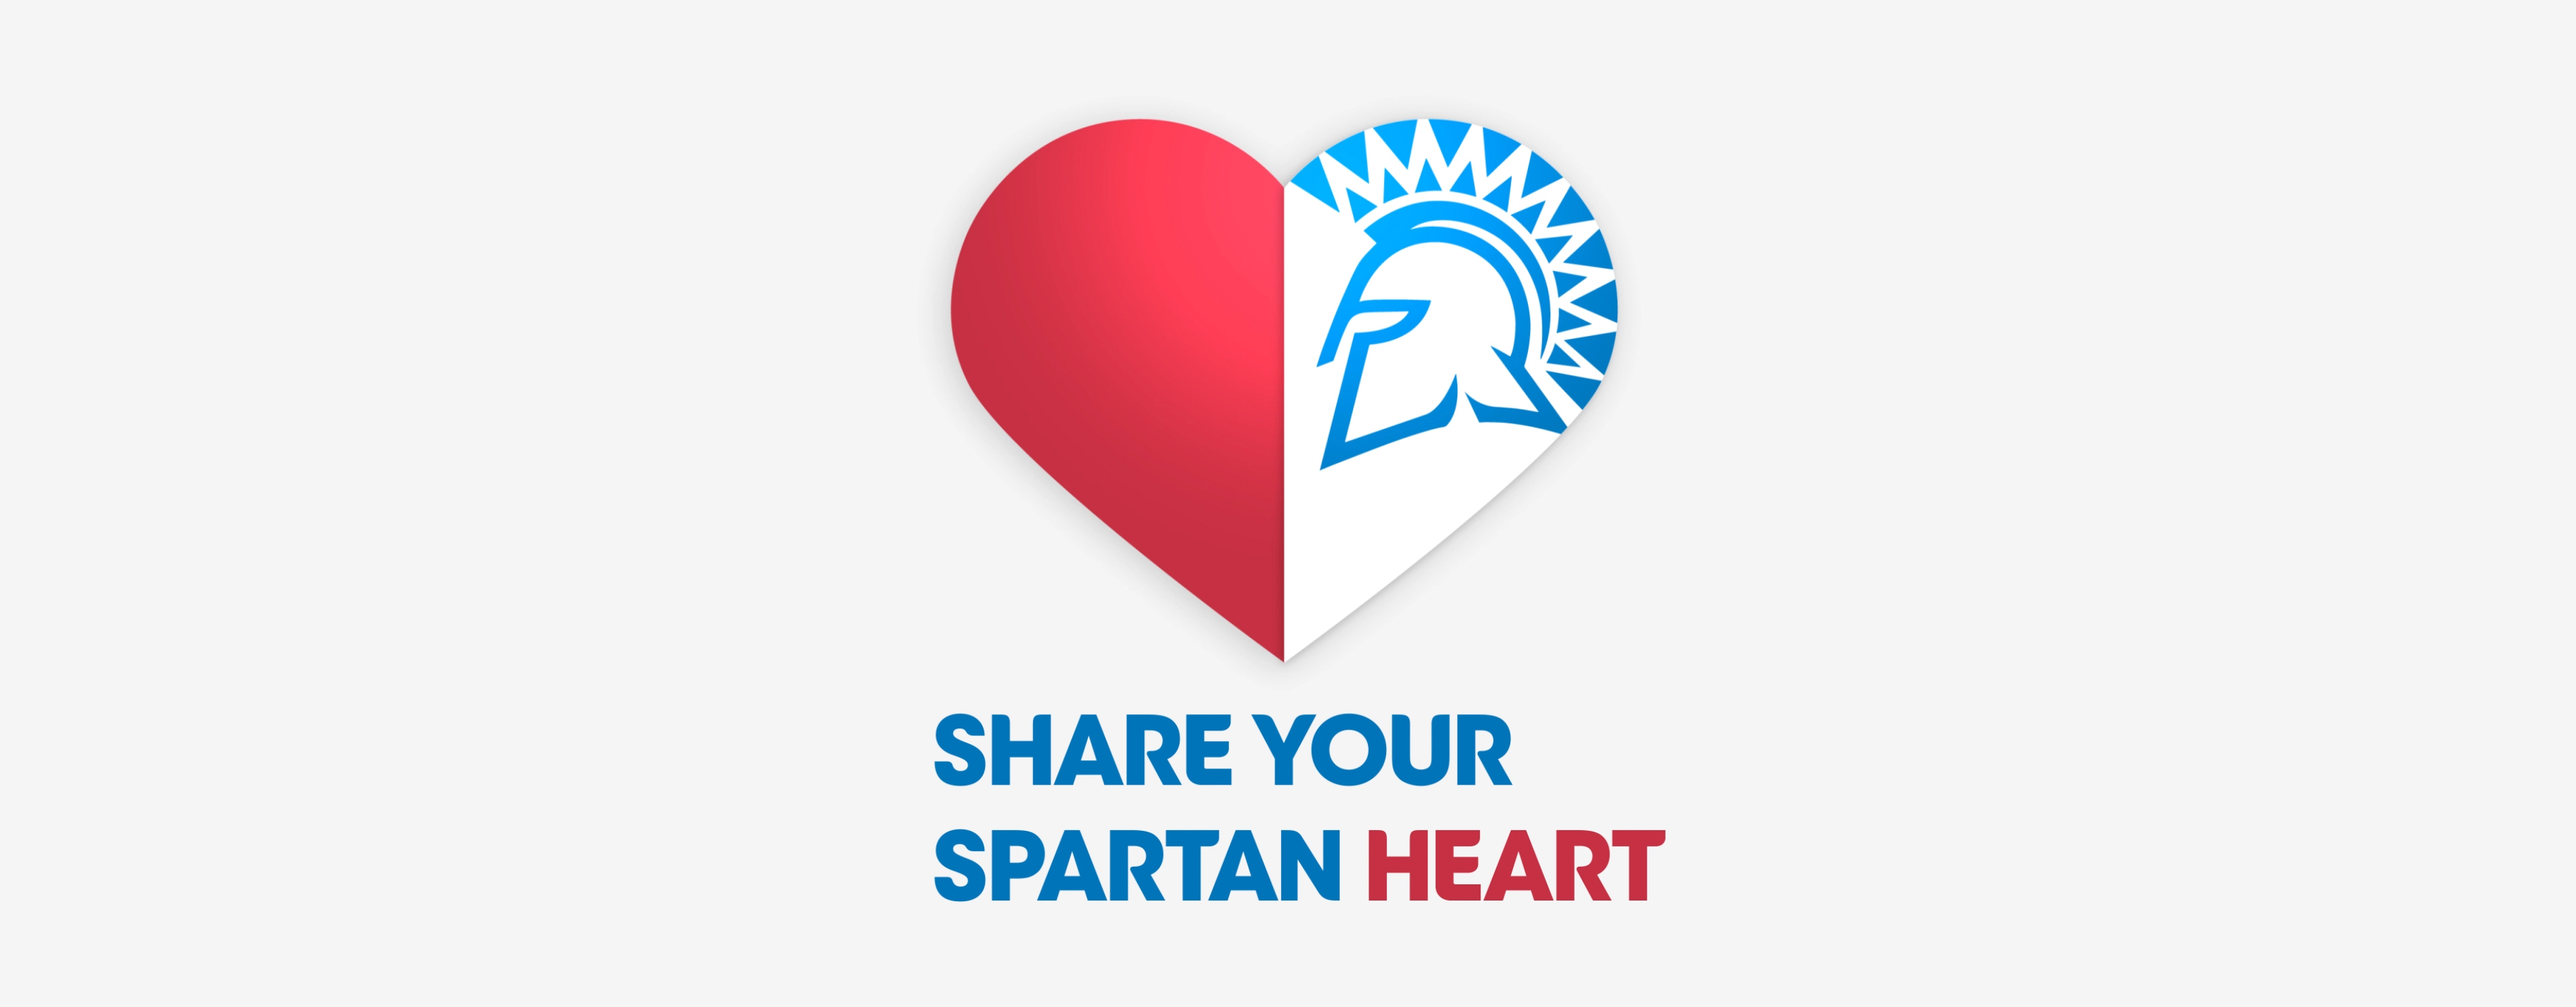 Share Your Spartan Heart.